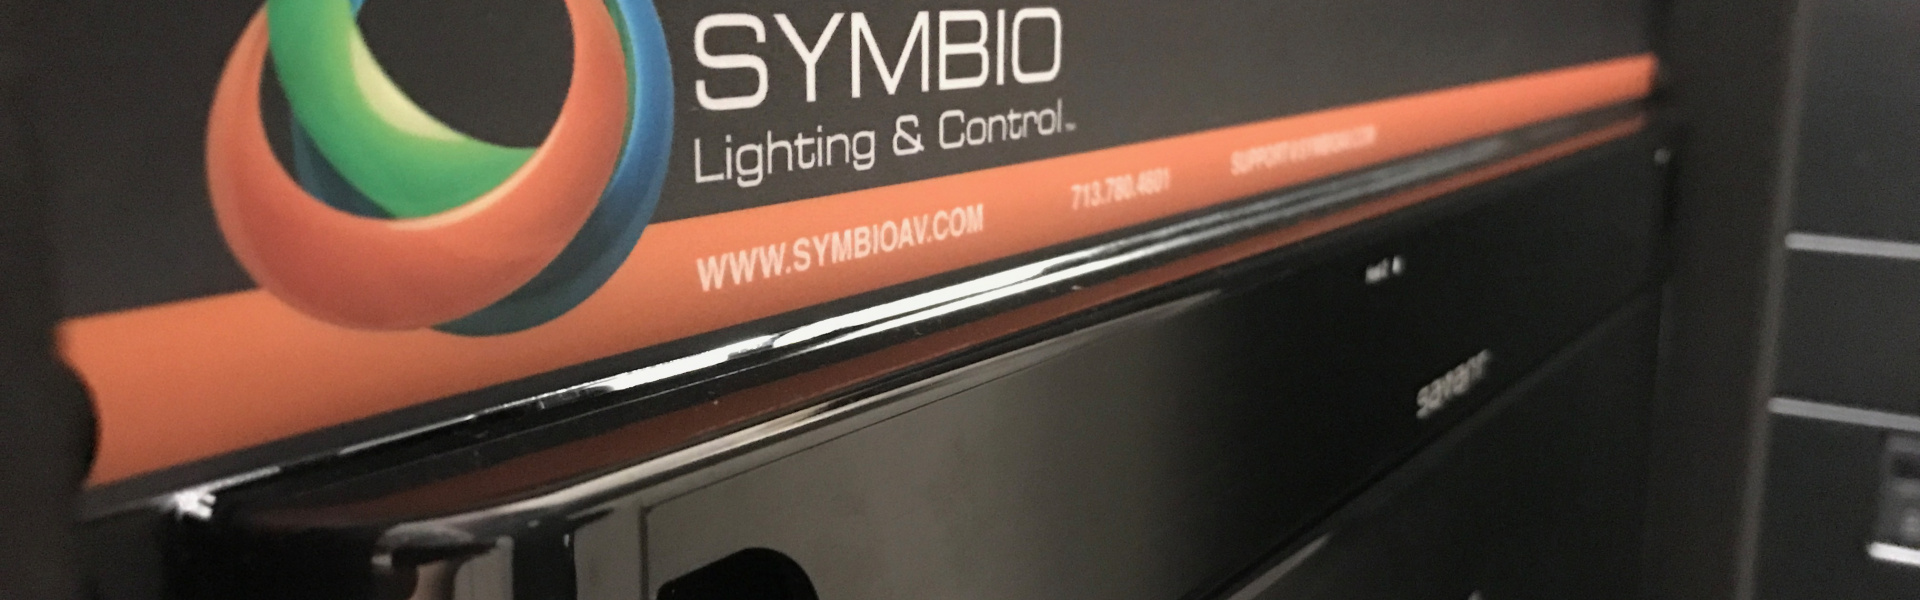 Smart home installation by Symbio Lighting & Control for Harris